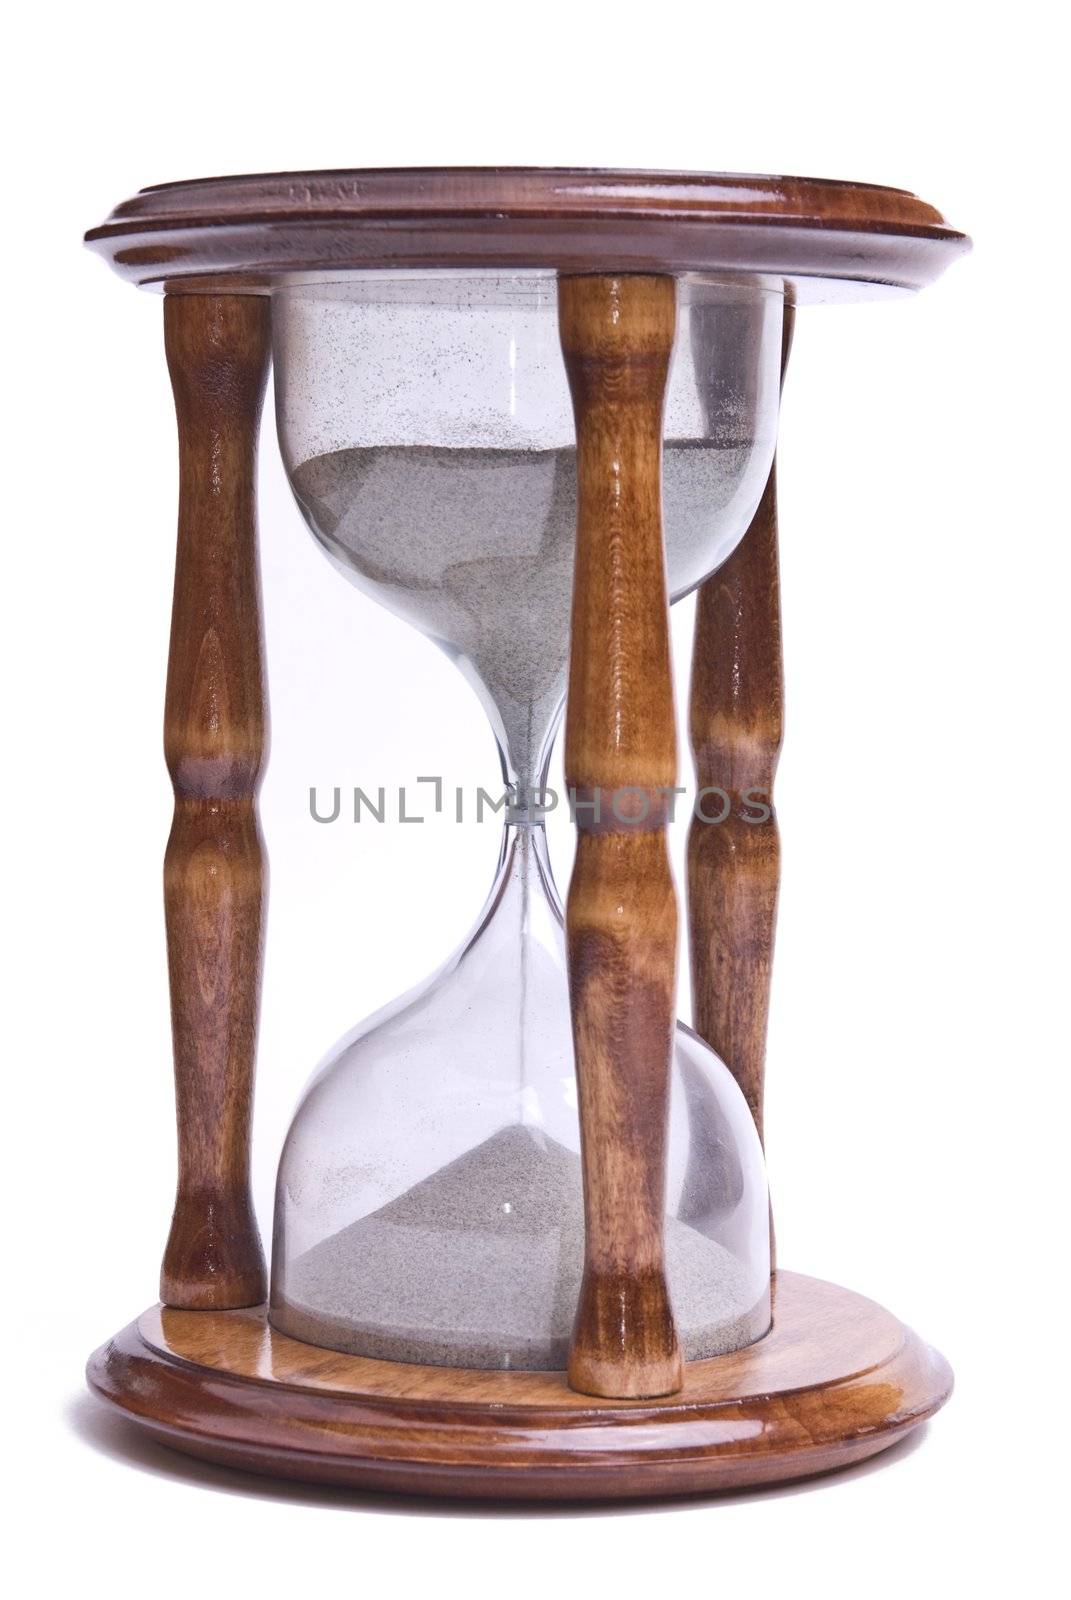 Hourglass by adamr